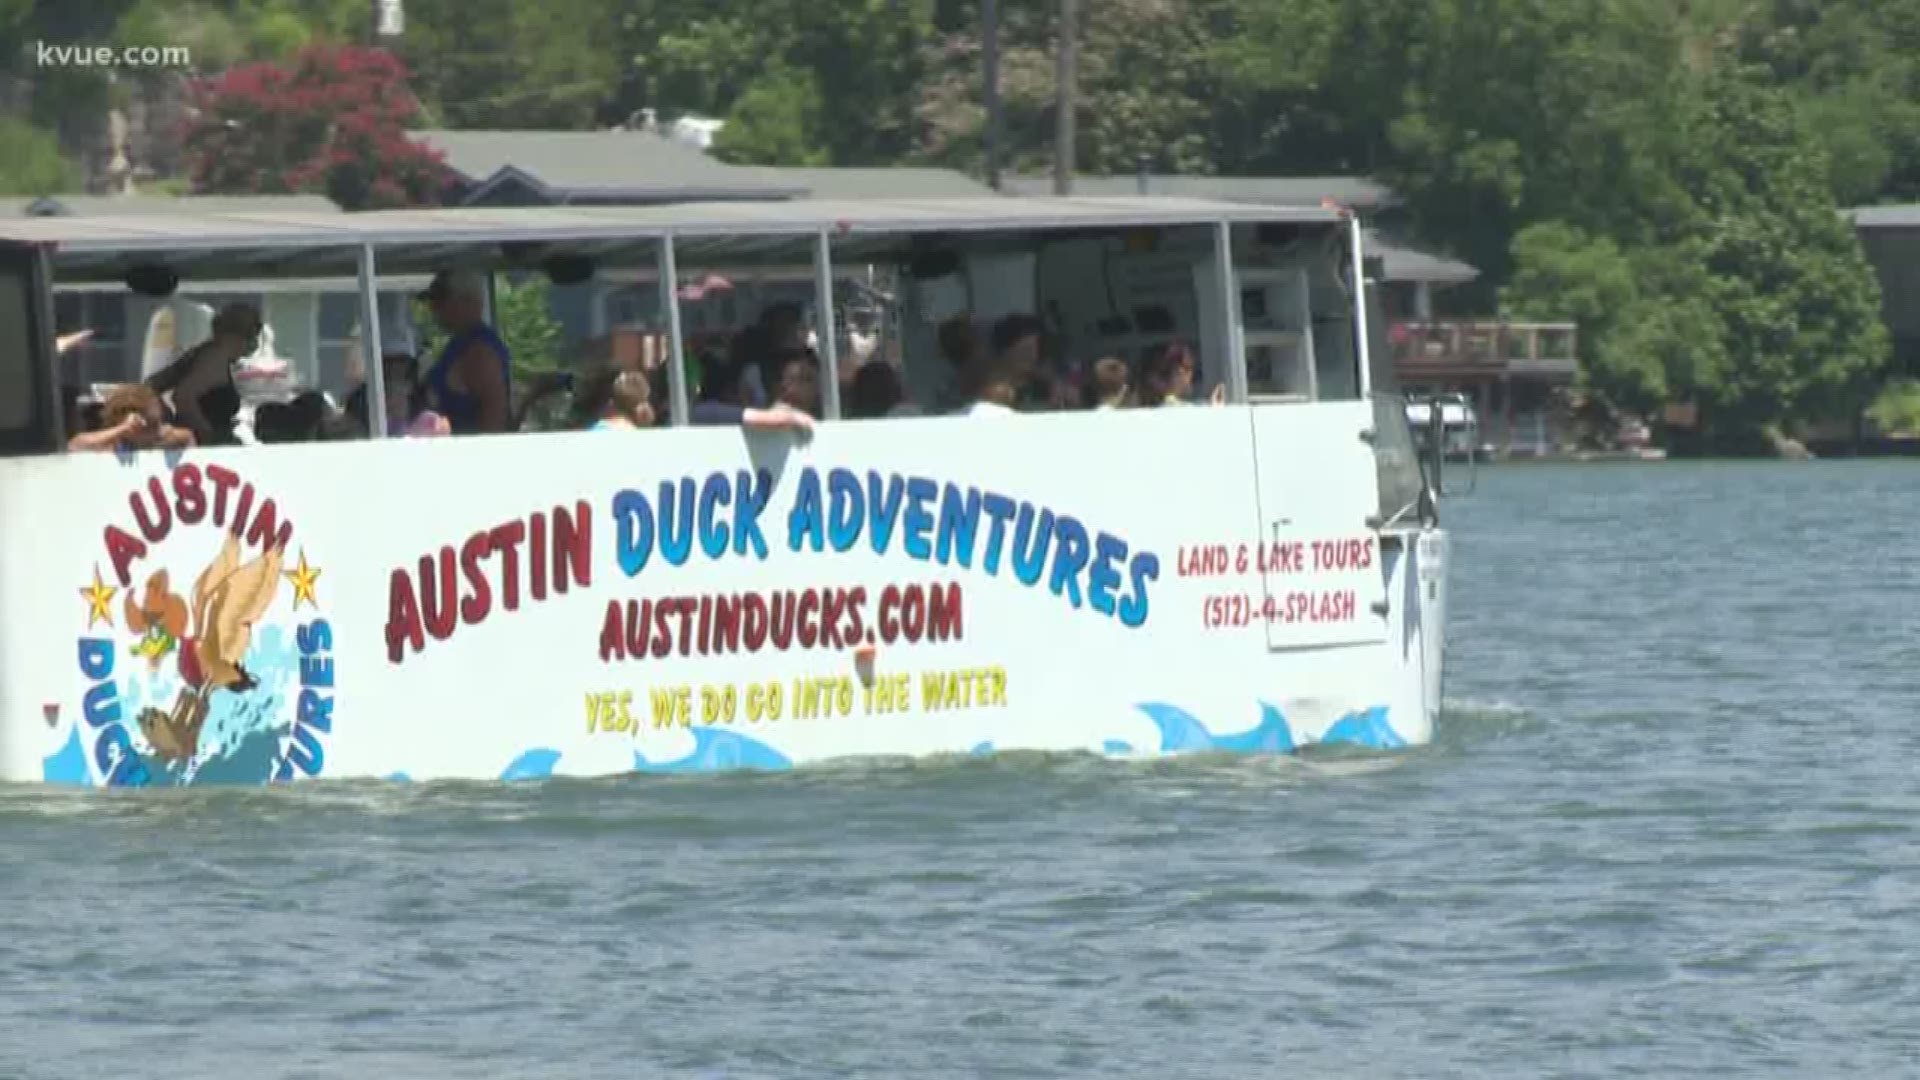 17 people were killed in a duck boat accident in Missouri. The accident has brought up concerns of a similar attraction here in Central Texas: Austin Duck Adventures. 